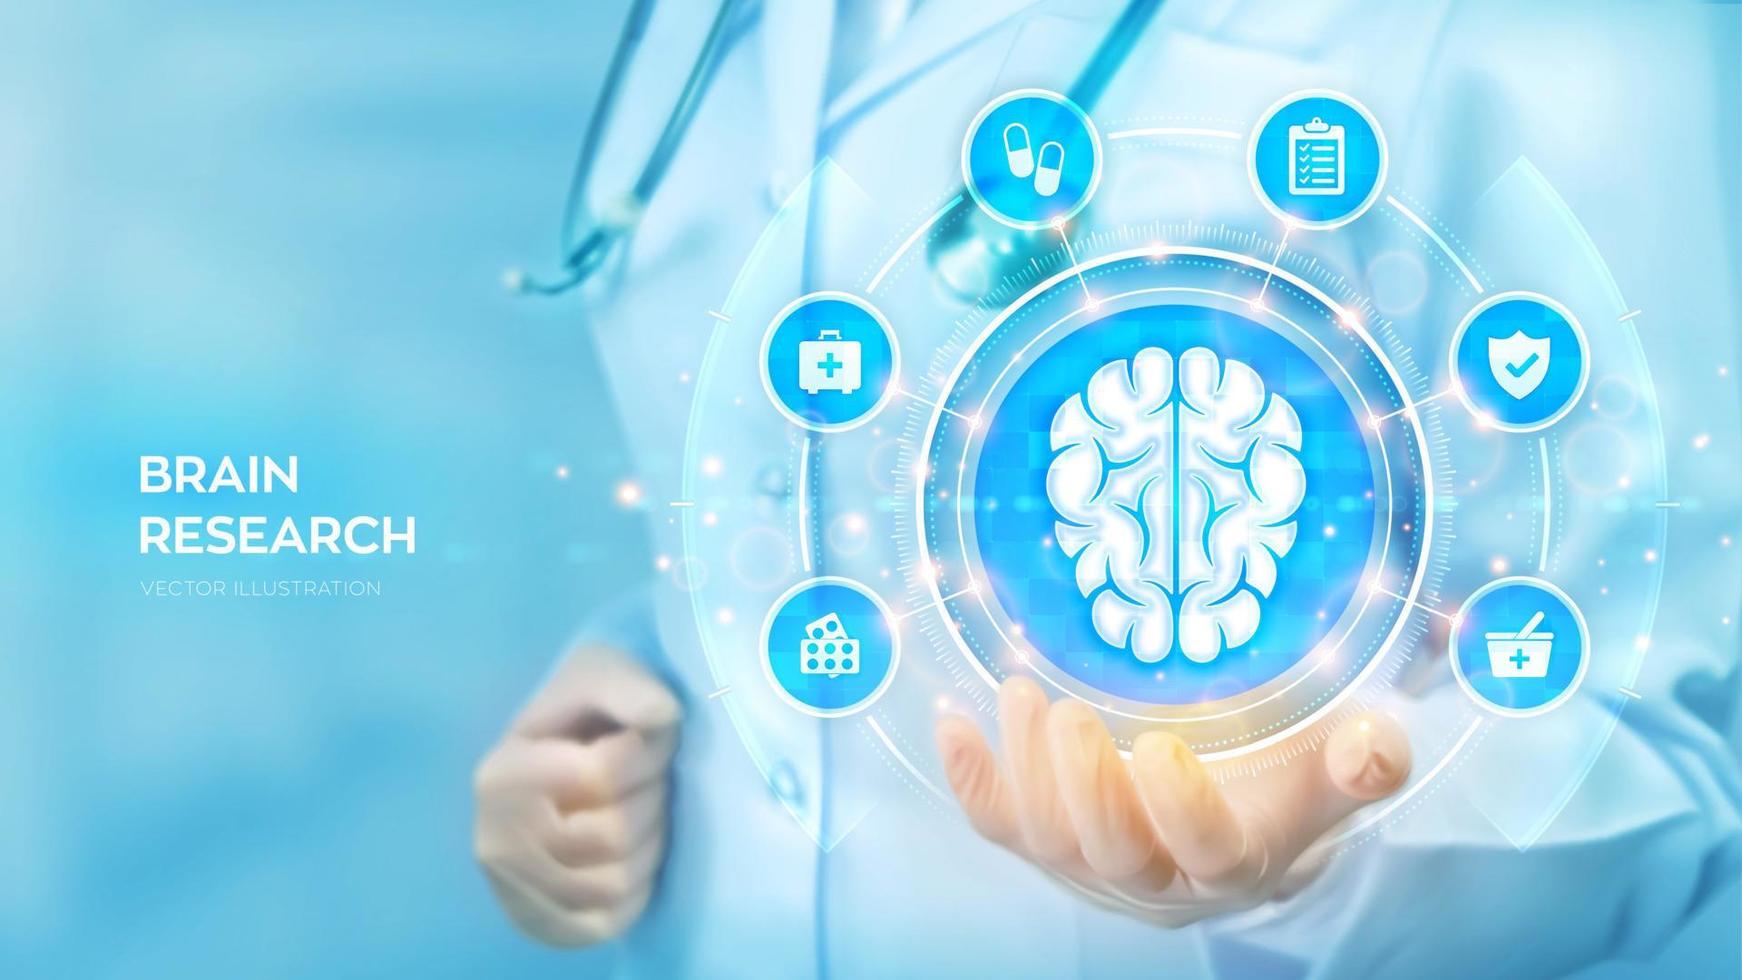 Brain research. Neurology. Doctor holding in hand the hologram of human brain and medical icons network connection on virtual screen. Innovative technology in science and medicine. Vector illustration